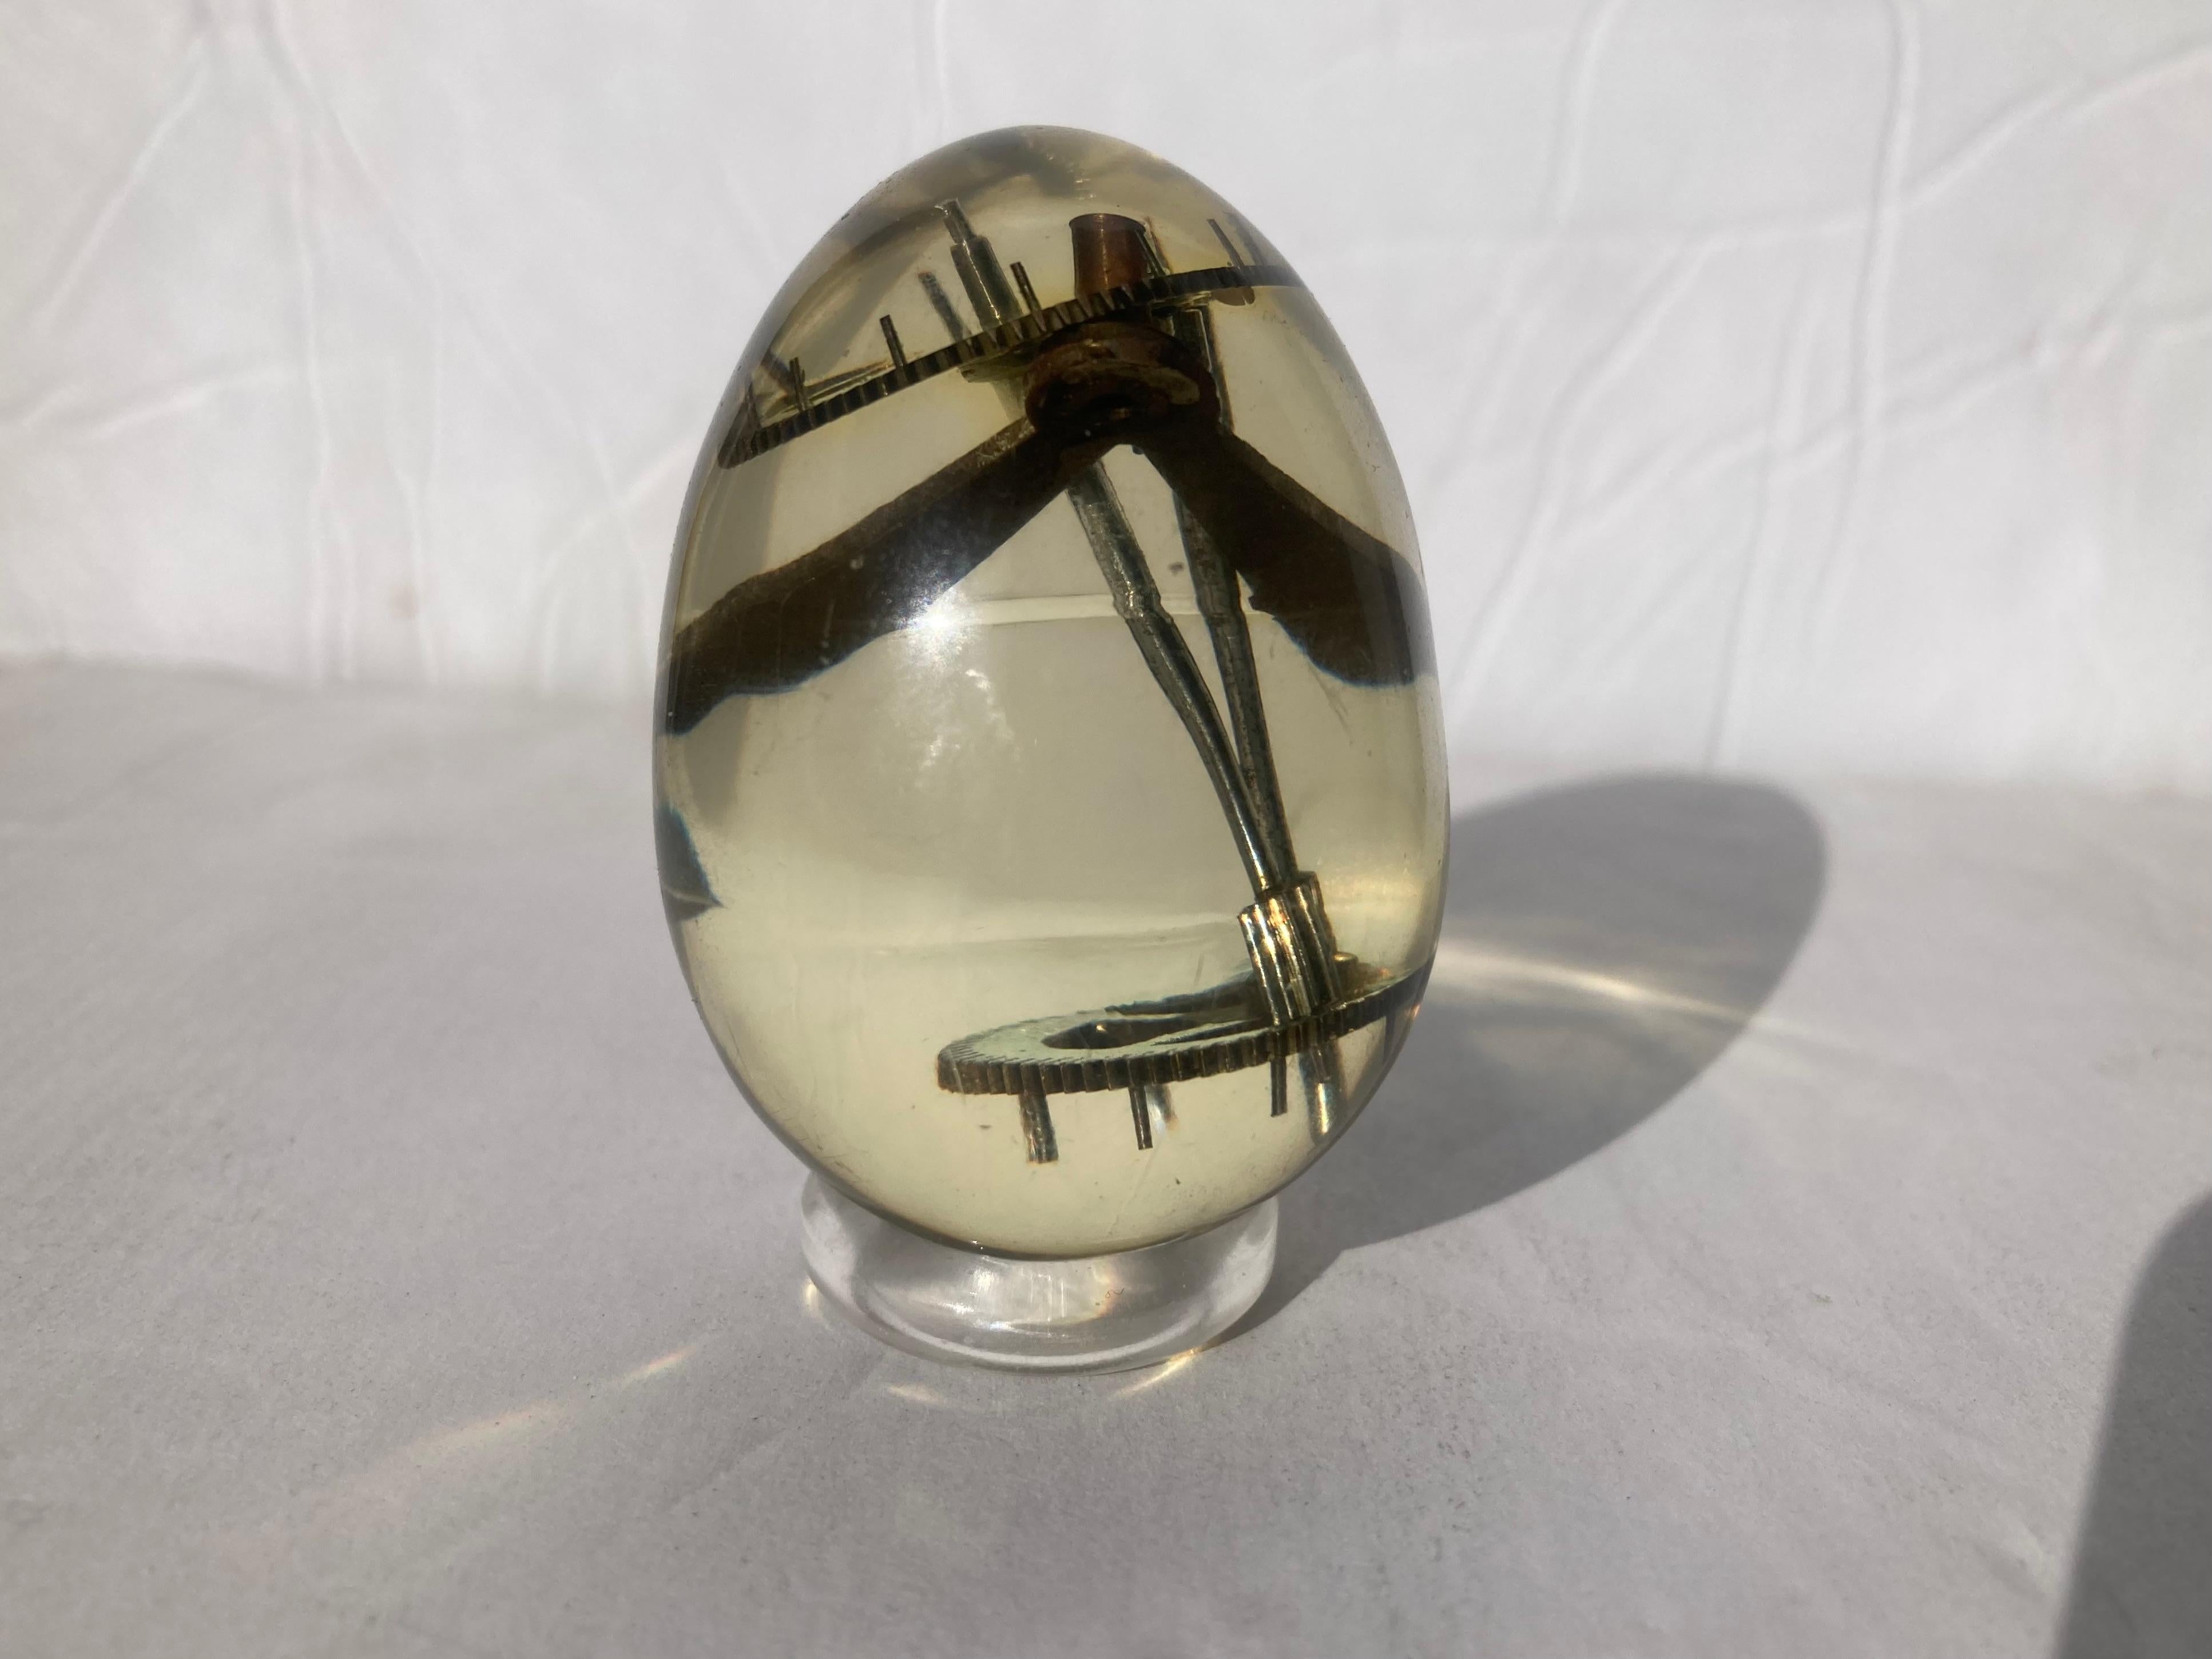 Resin Egg with Clock Parts on Pierre GIRAUDON  Sculpture /Ornament / Paperweight In Good Condition For Sale In Los Angeles, CA